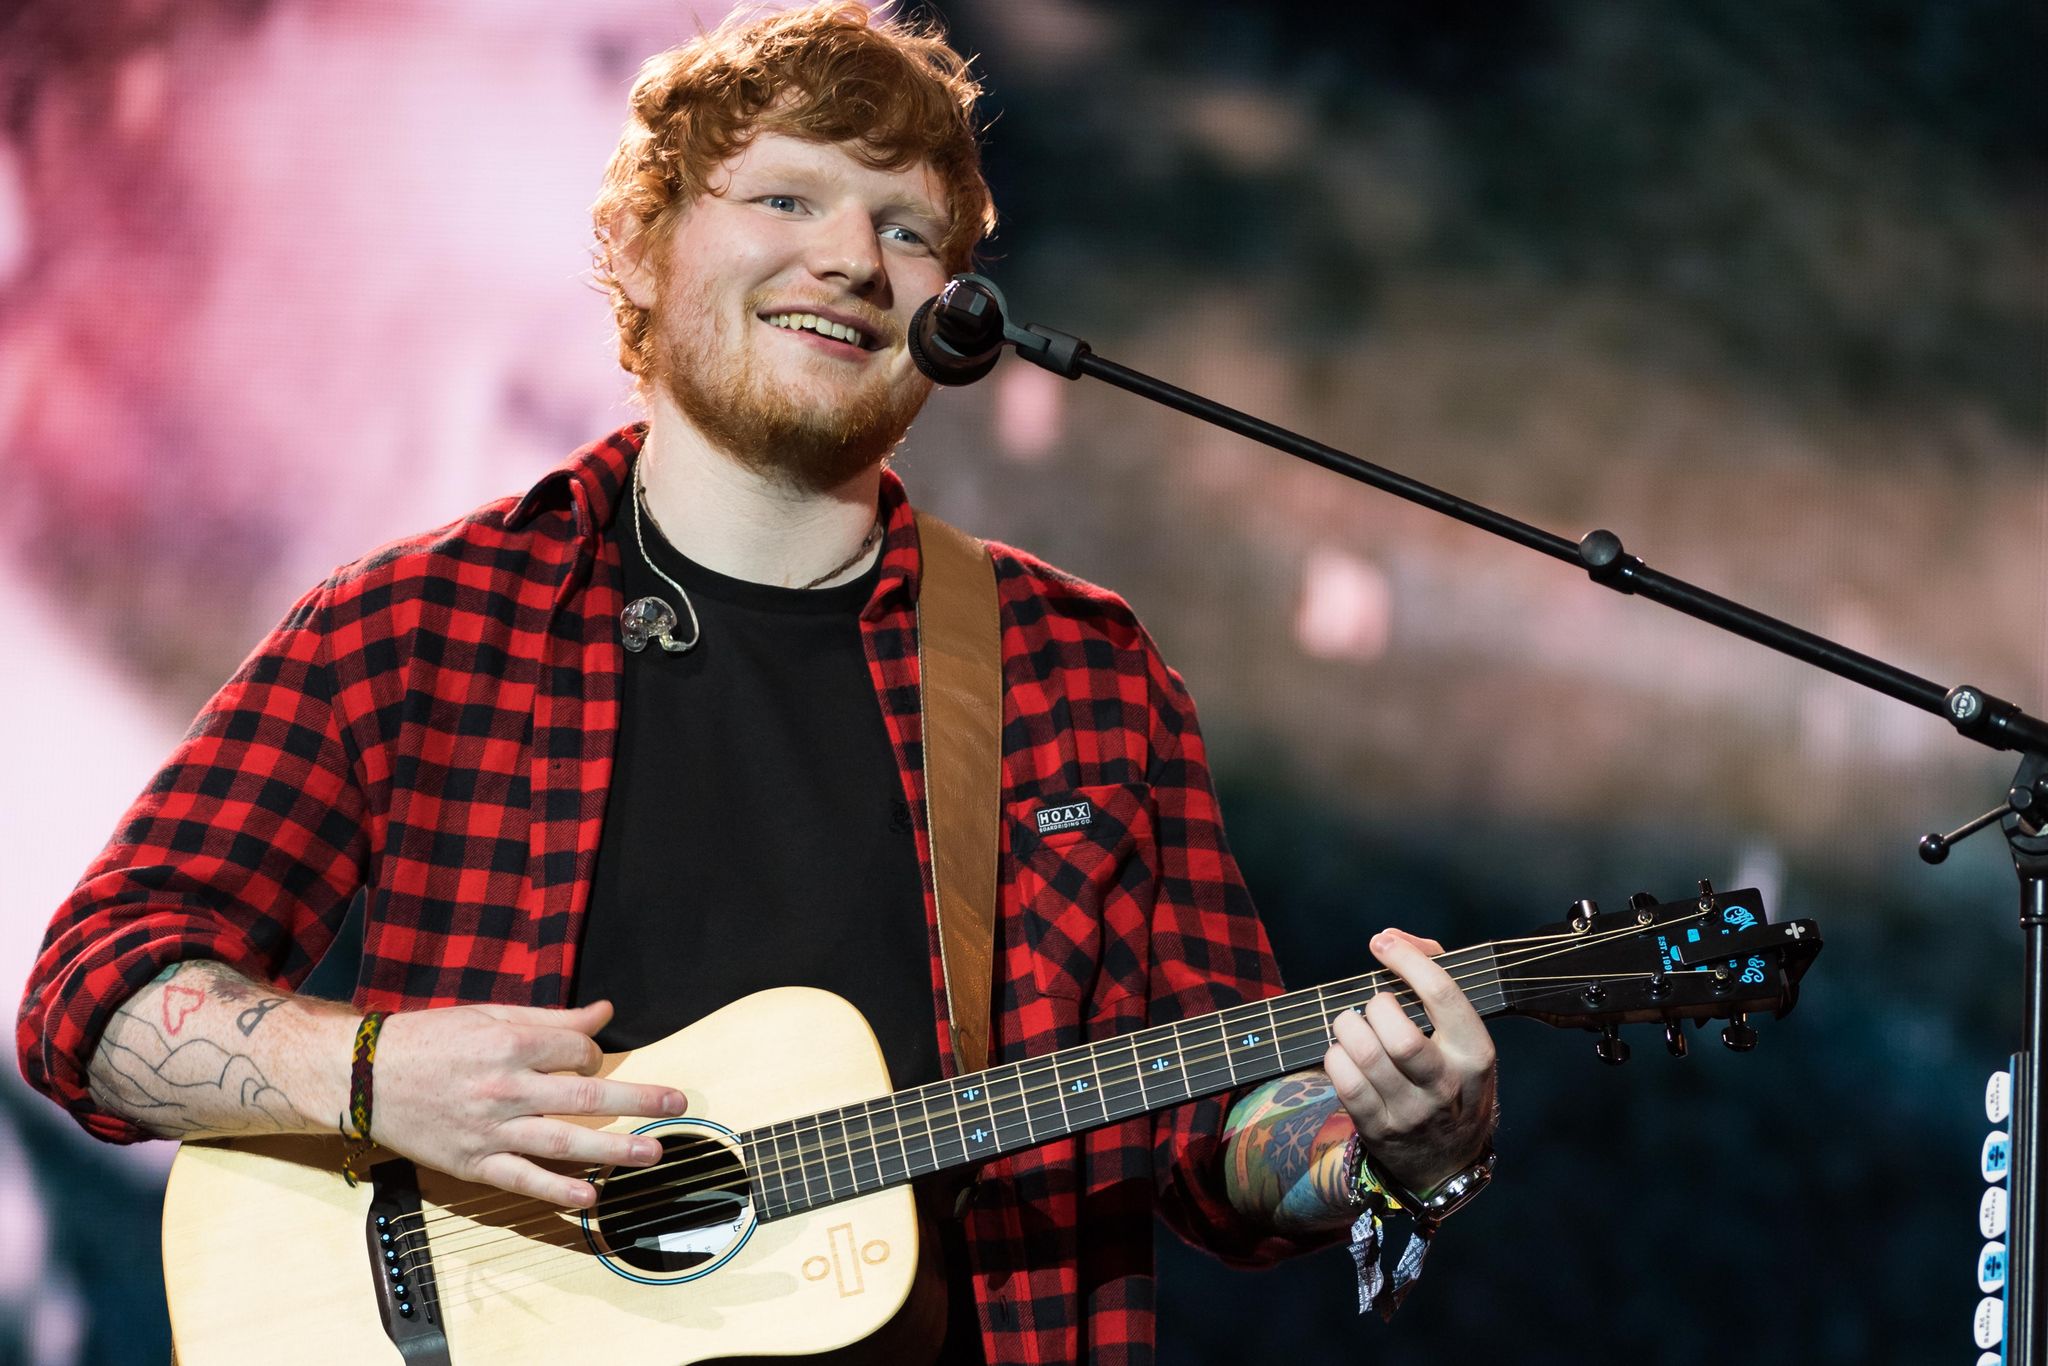 Ed Sheeran has landed his first major role as an actor